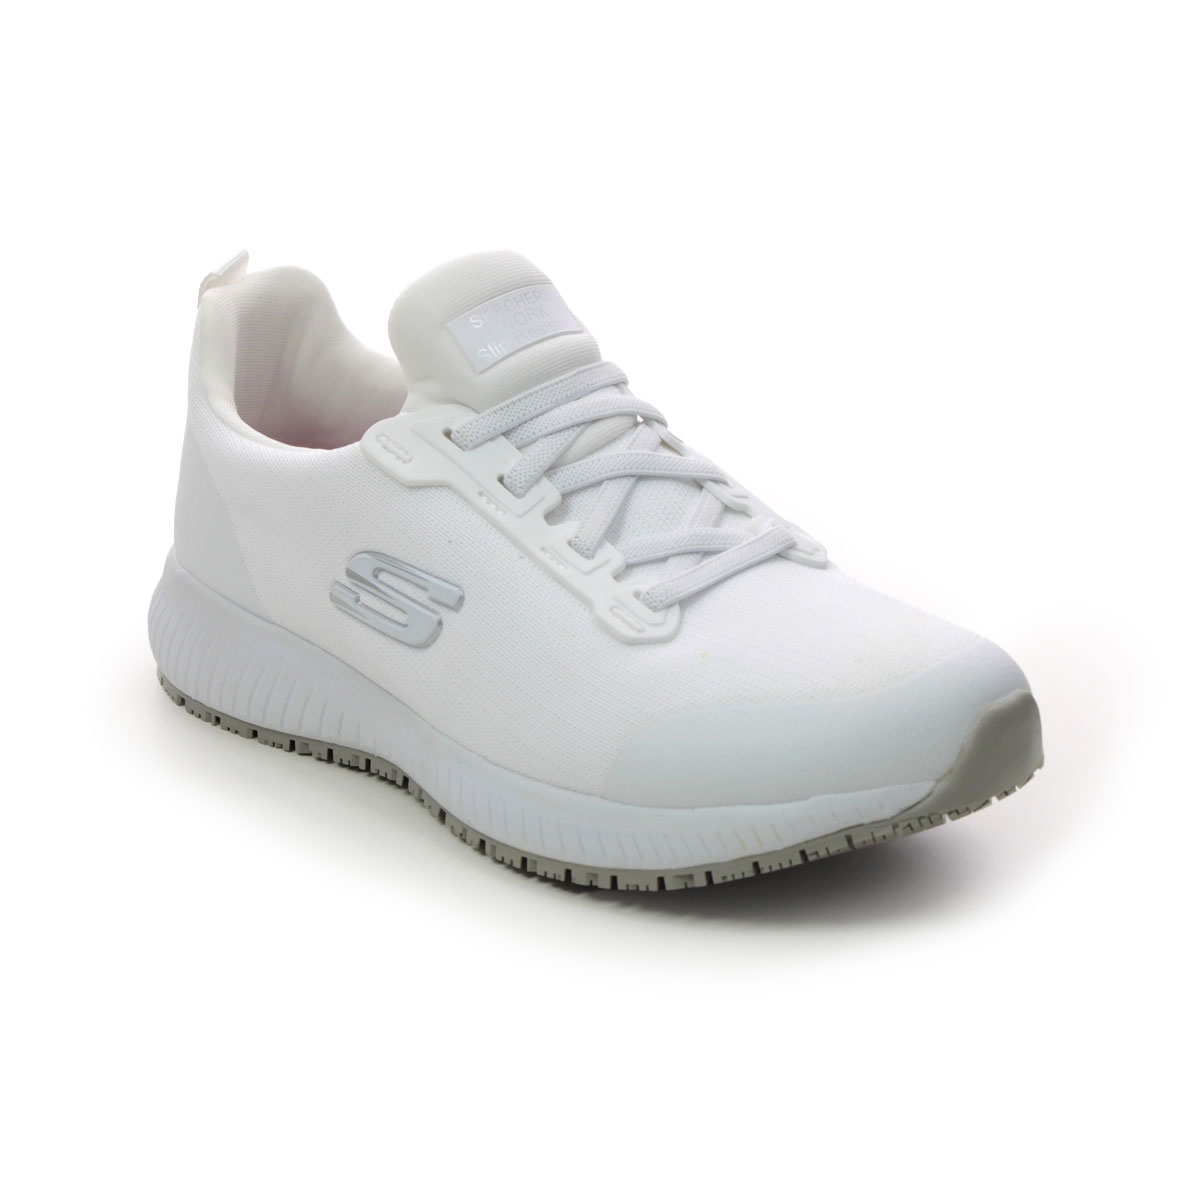 Skechers Work Squad Slip Resistant White Womens Trainers 77222Ec In Size 4 In Plain White